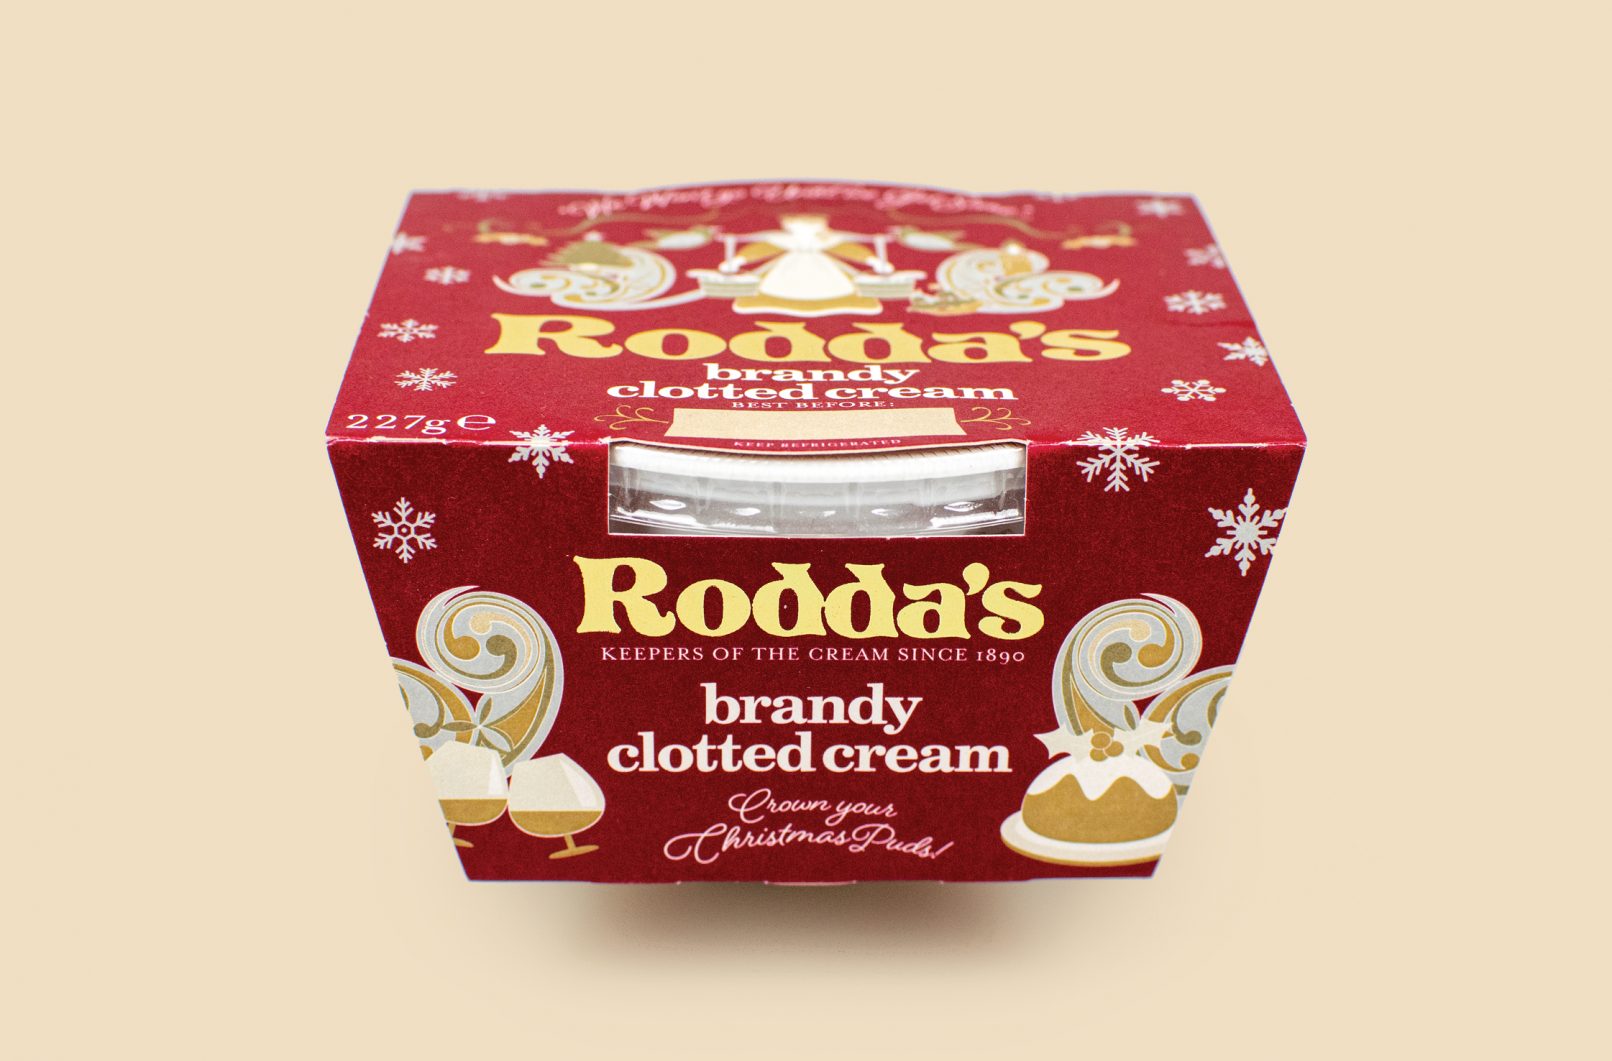 Feature image for Rodda's Cornish Brandy Clotted Cream packaging design